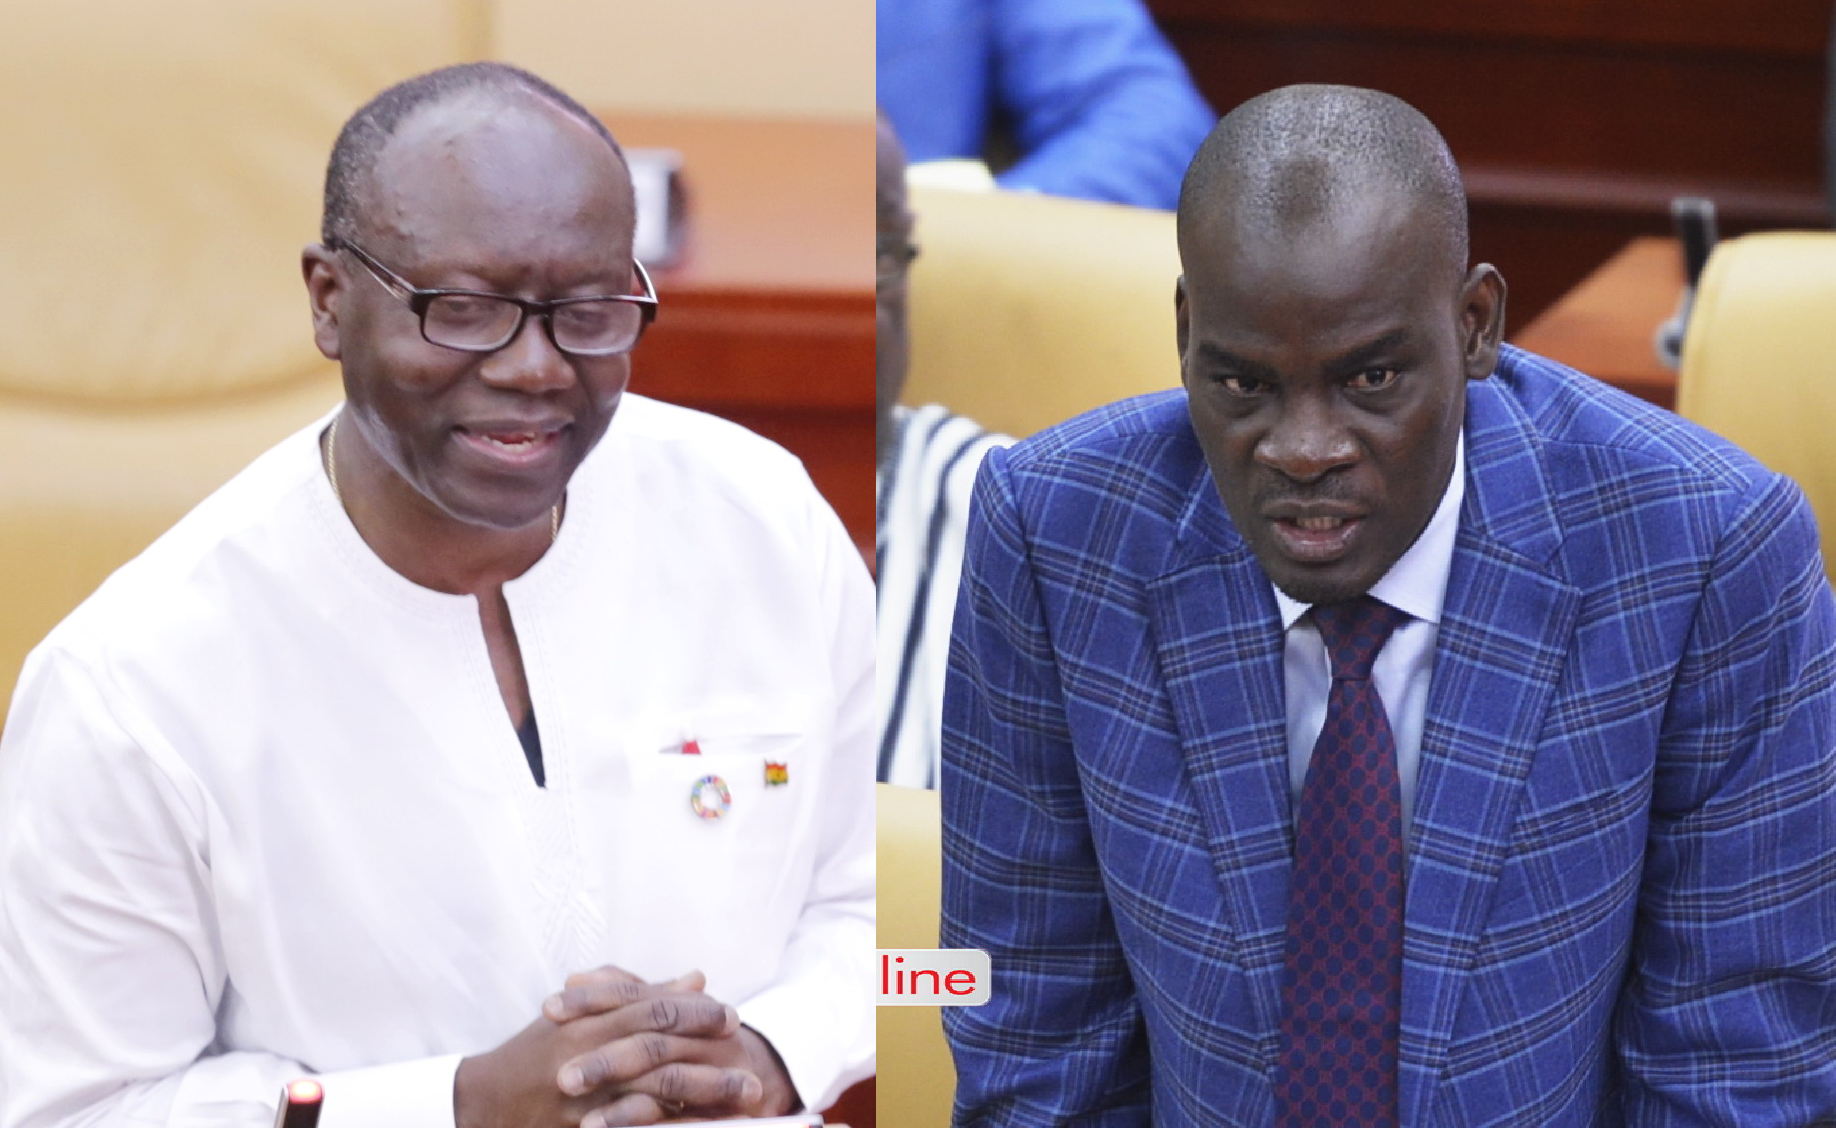 Breaking News: Finance Minister Reduces E-levy rate to 1.5% but Minority reject it